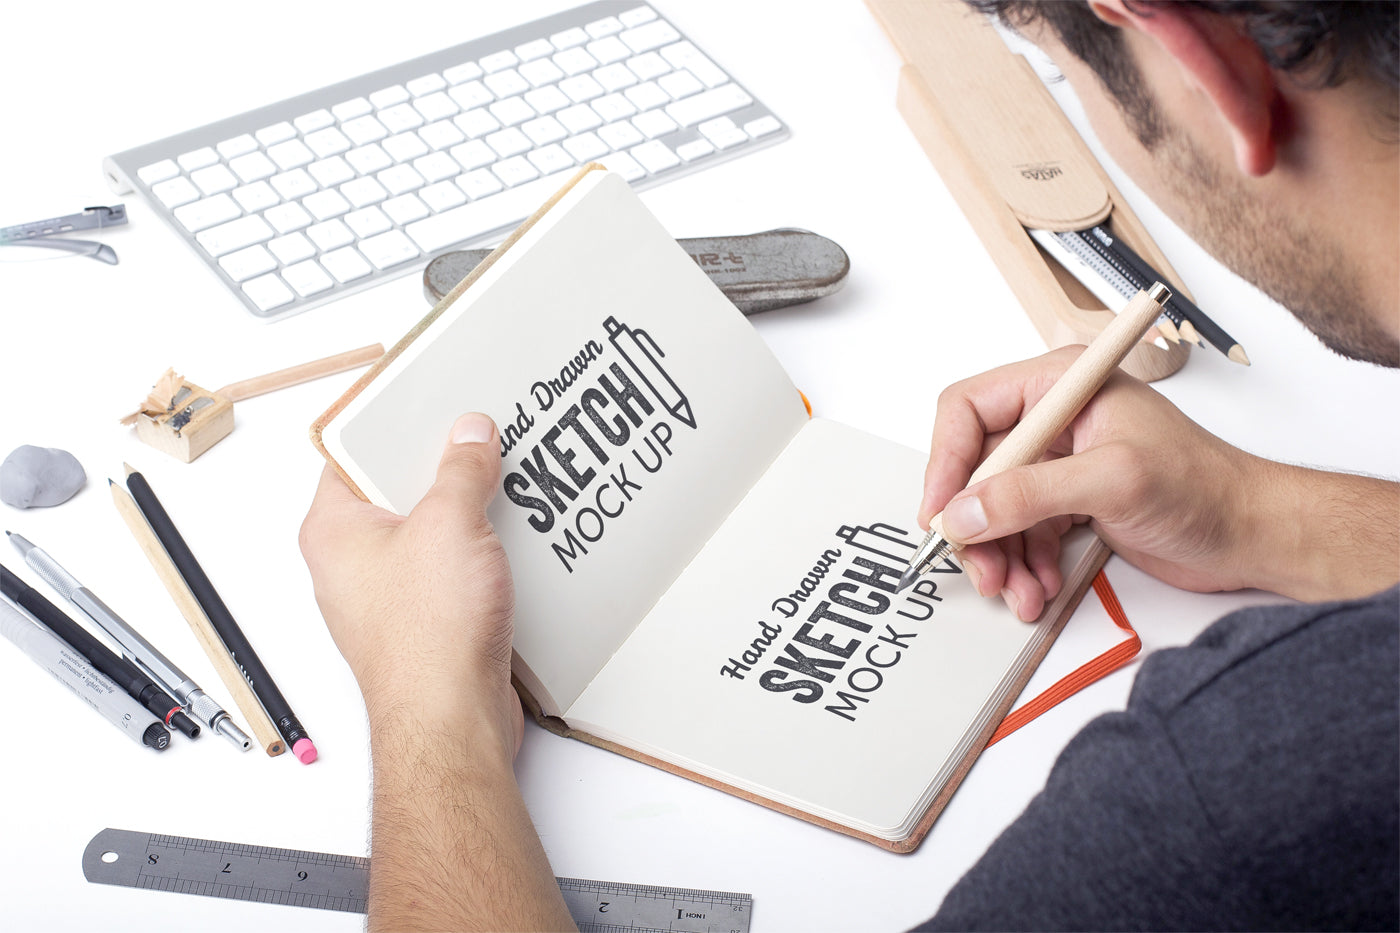 Free Hand Drawn Sketch Mockup with a Man Drawing